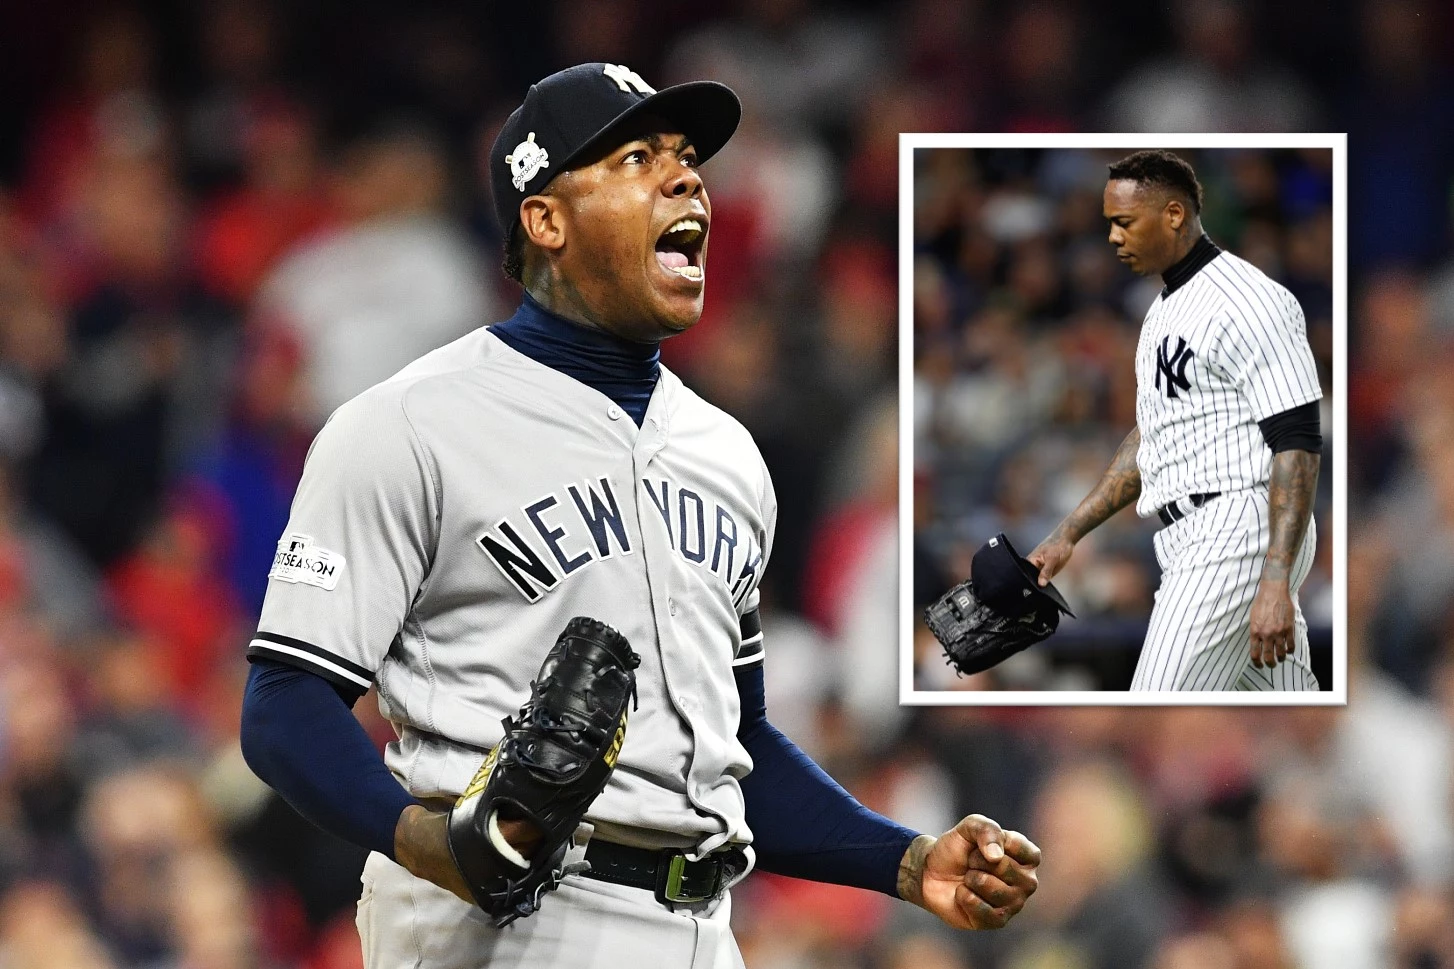 Once a Superstar, This NY Yankees' Career Has Ended in Disgrace